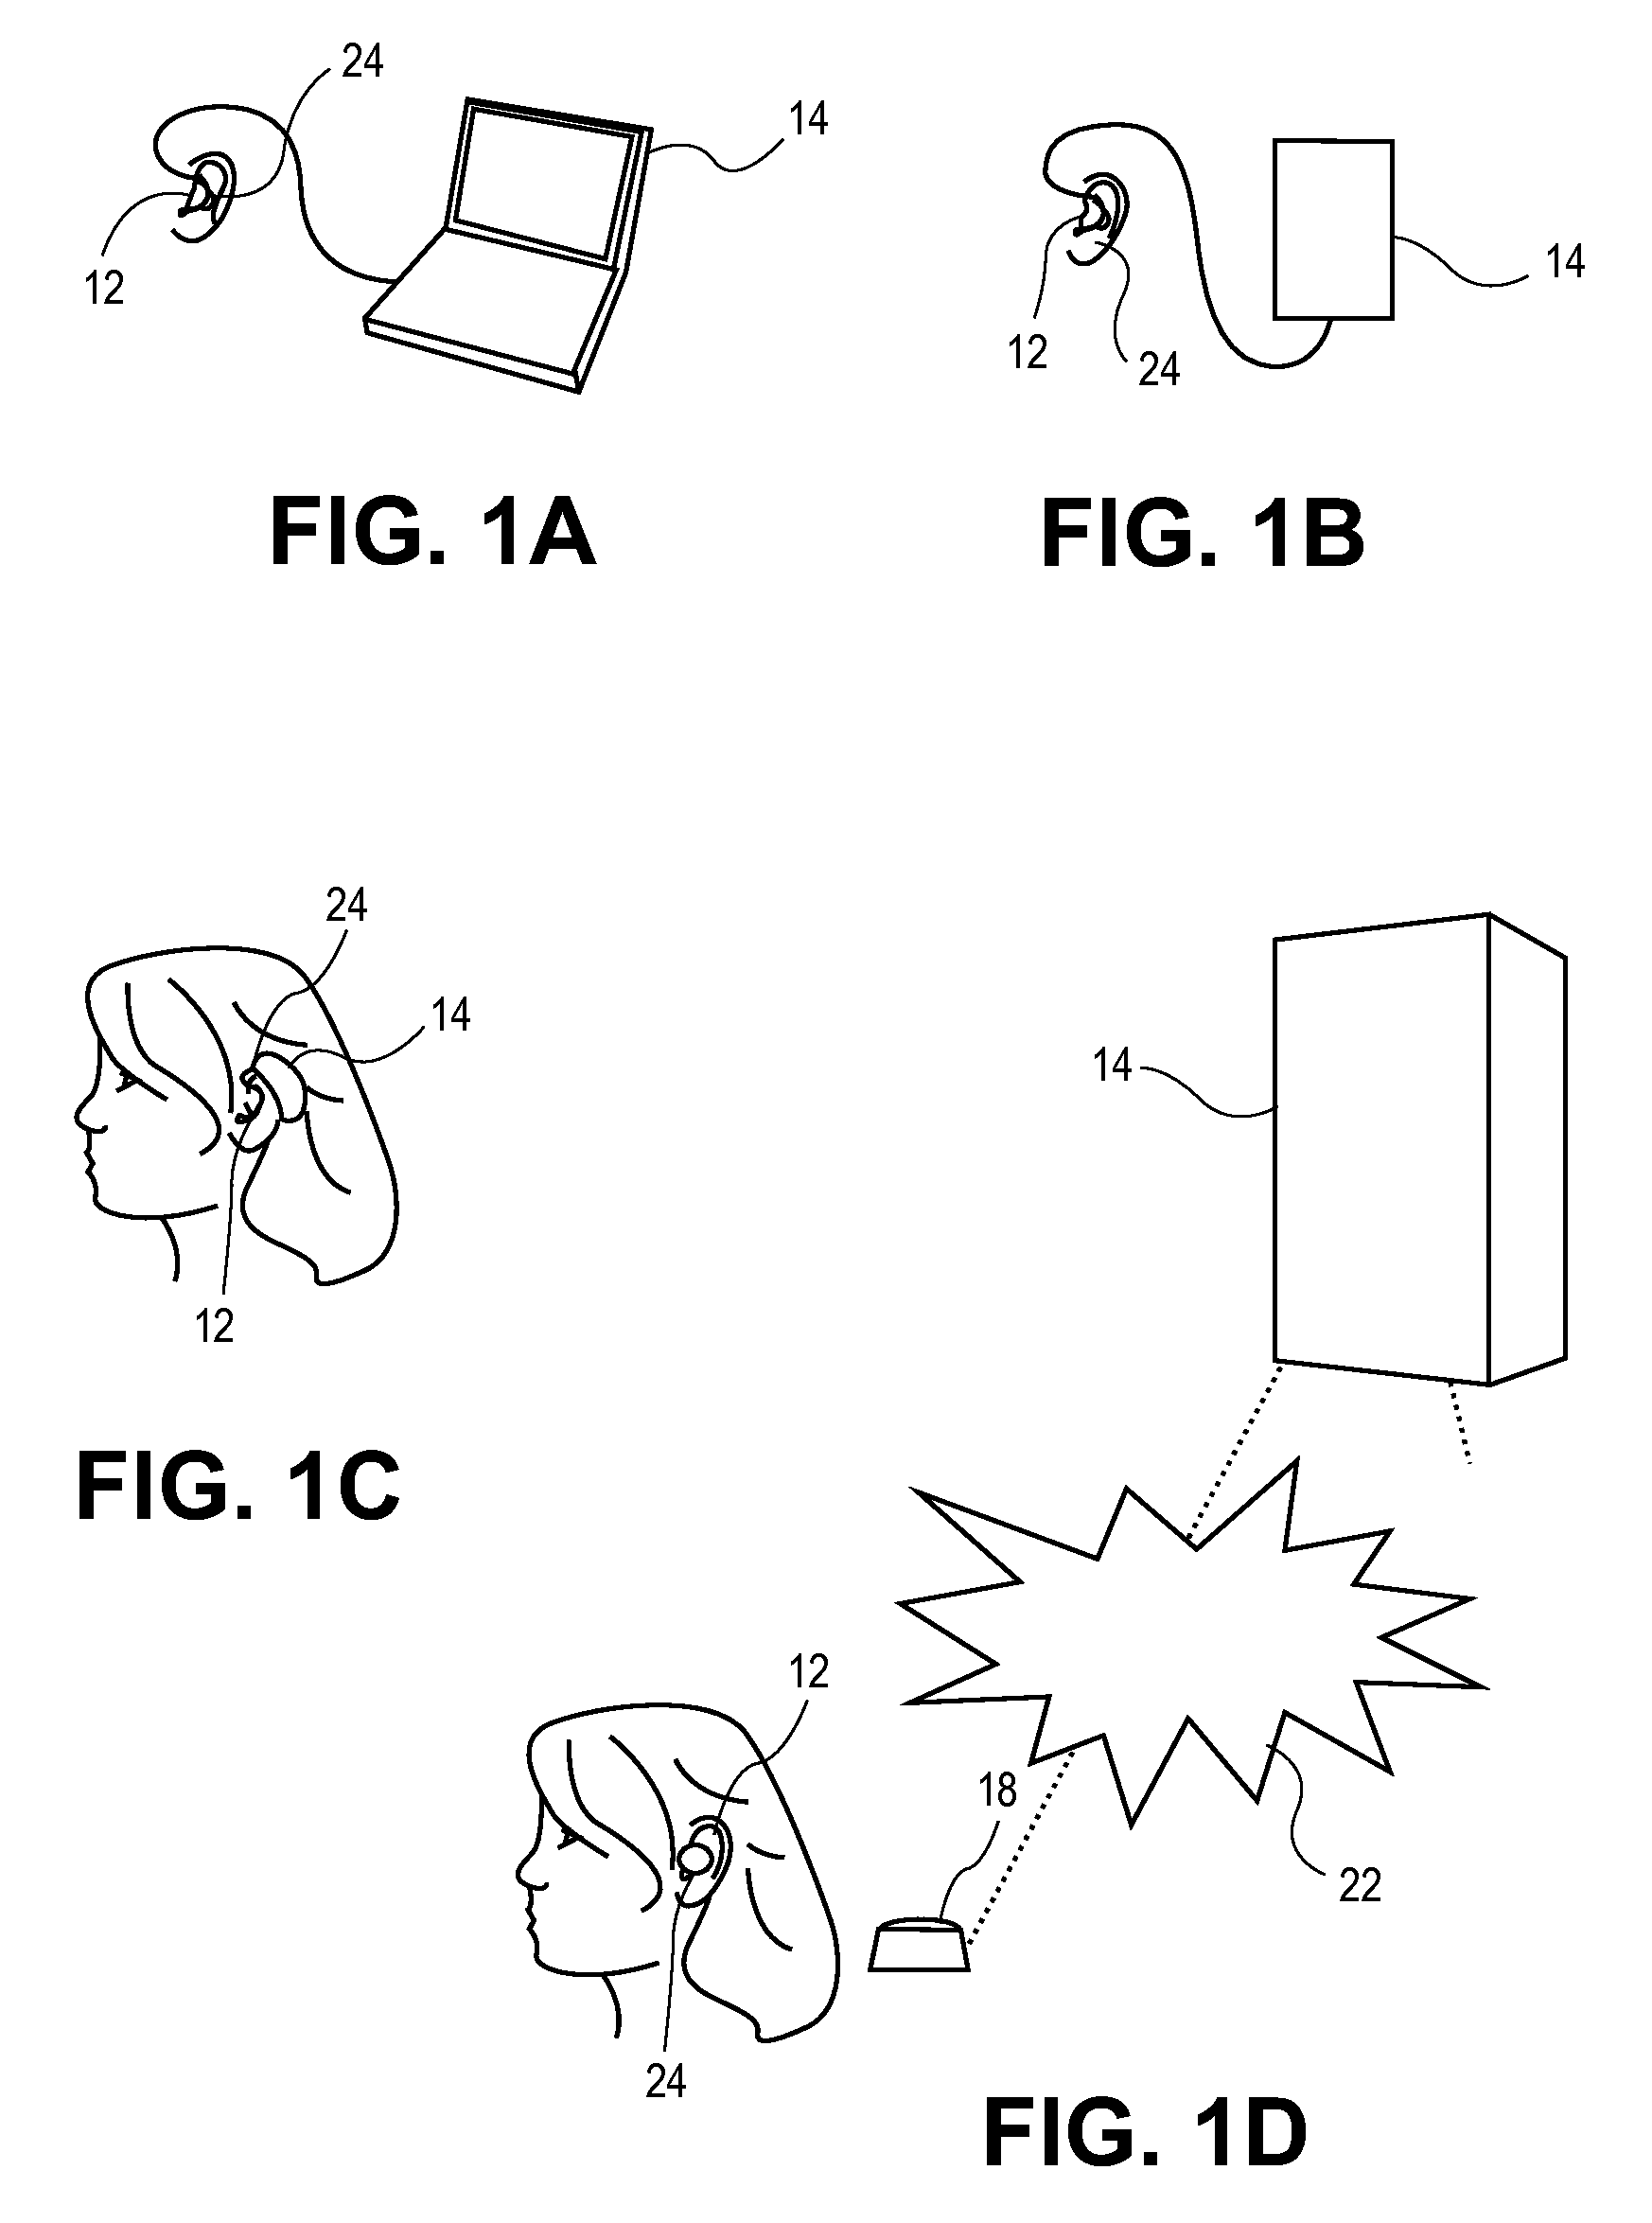 Systems and Methods for Monitoring and Modifying Behavior